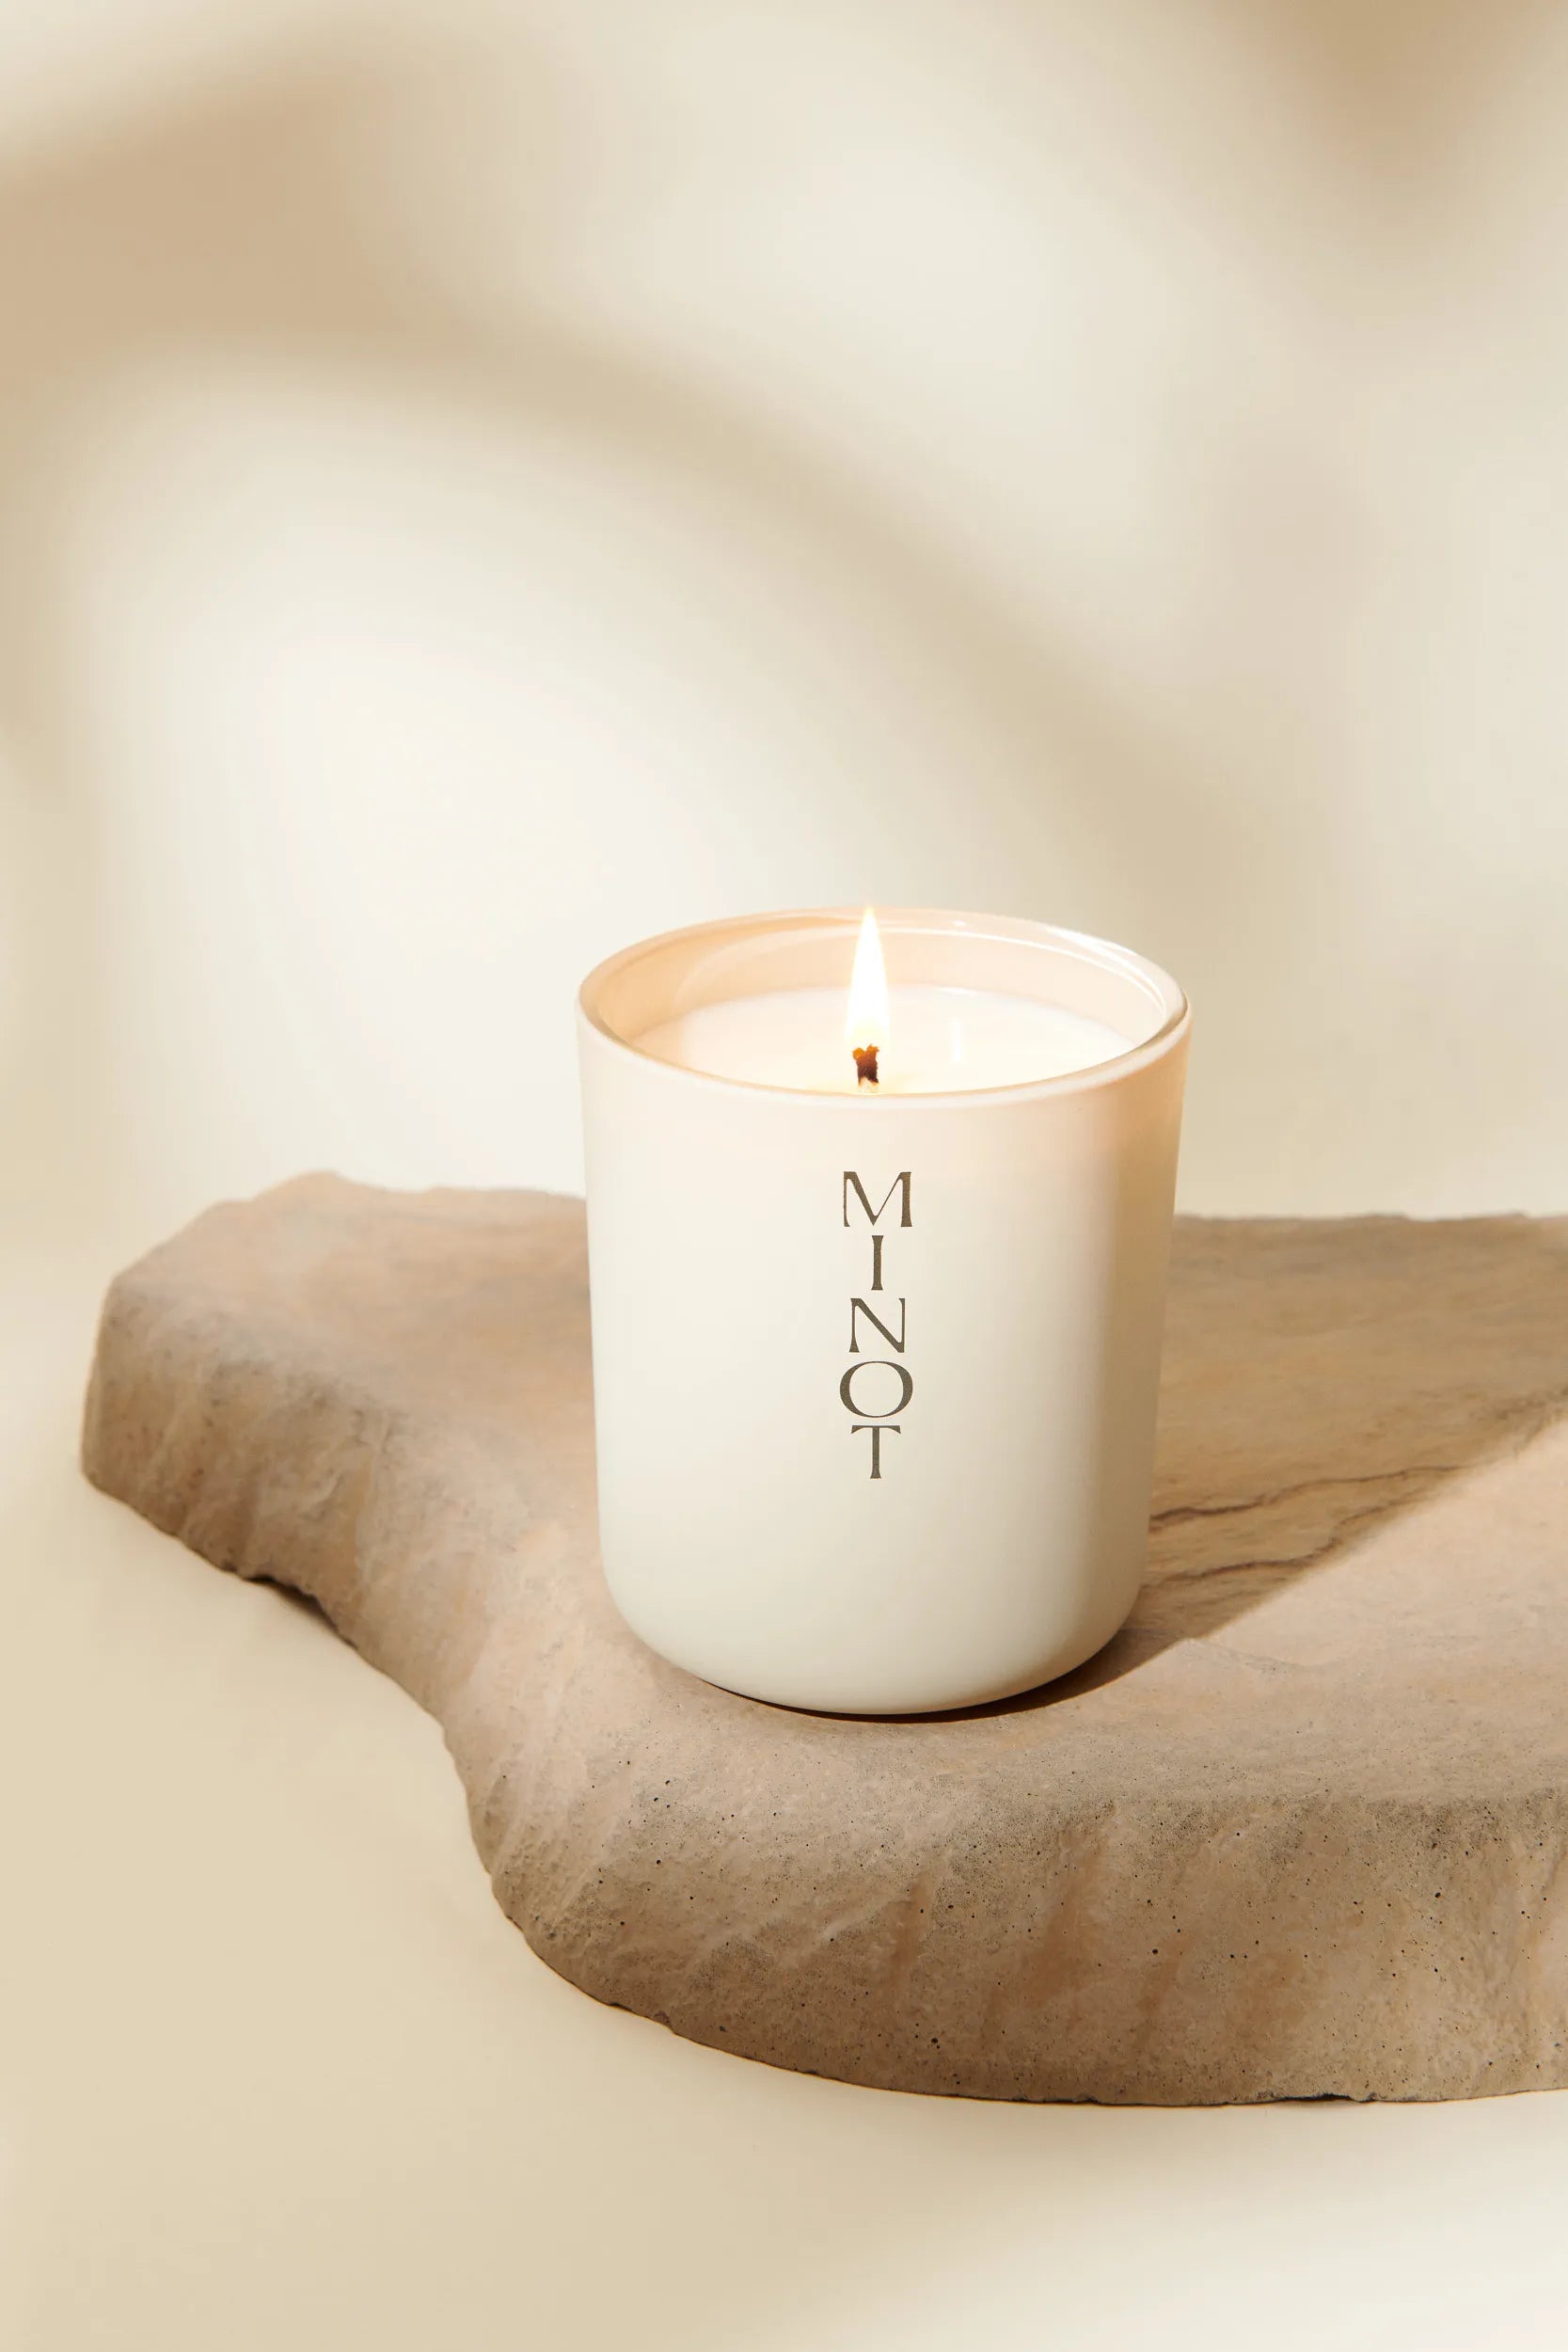 The clean-burning Atmosphere candle is lit, surrounded by scents of almond, coconut, and sandalwood